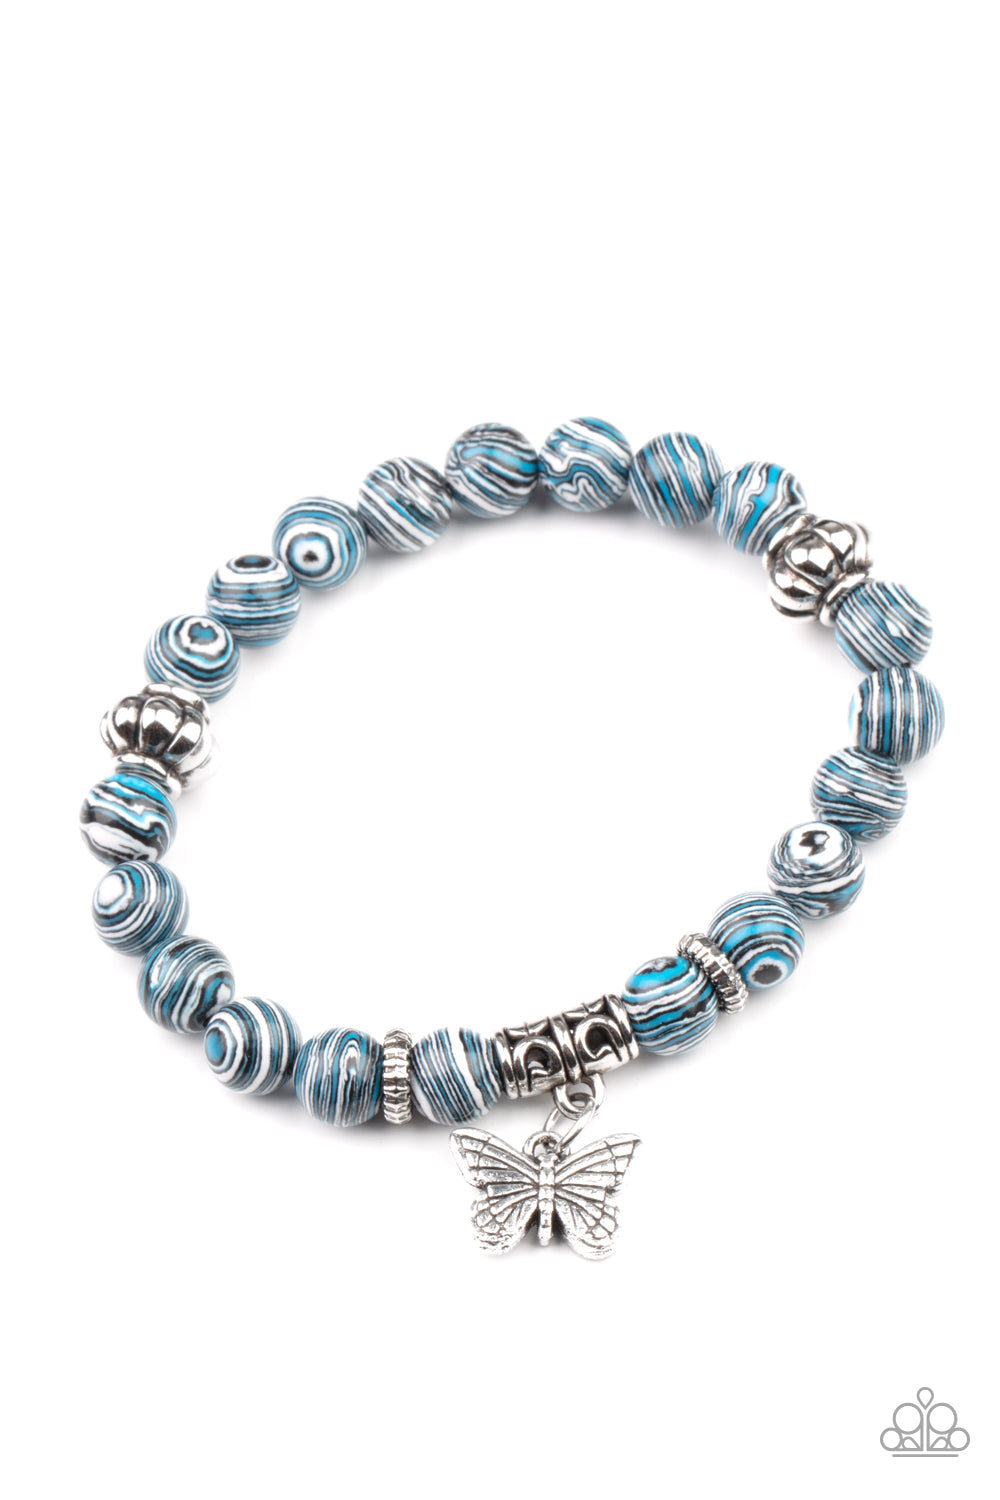 Butterfly Wishes - Blue and Silver Bracelet - Paparazzi Accessories - Swirling with blue, black, and white accents, colorful stone beads and ornate silver accents are threaded along stretchy bands around the wrist. A dainty silver butterfly charm dangles from the display, adding a whimsical flair.